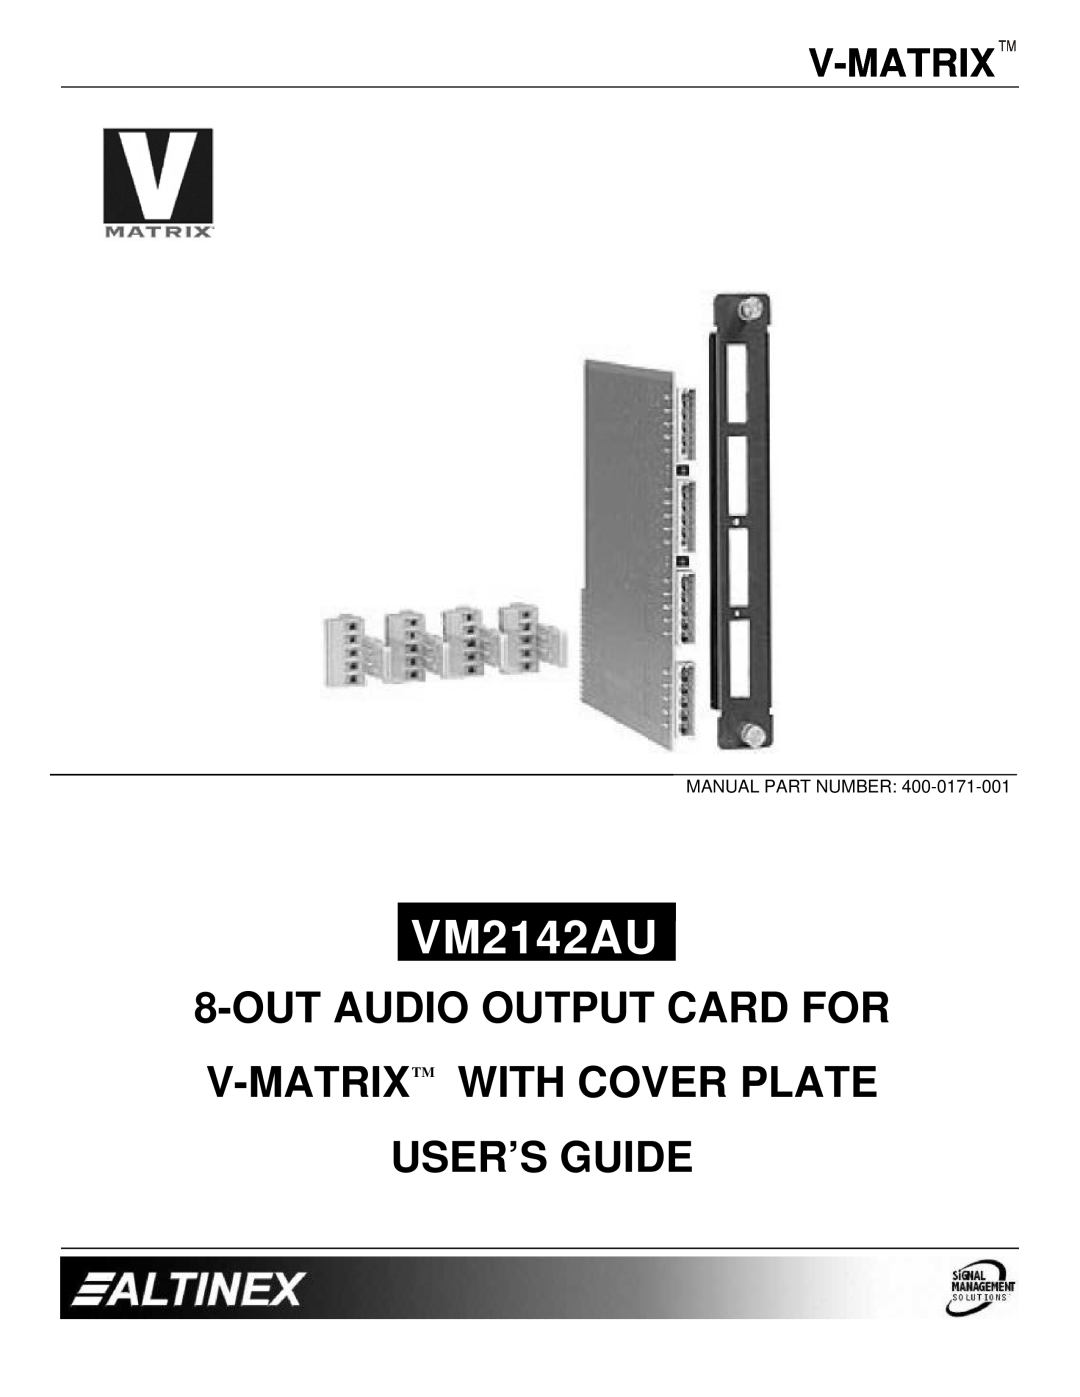 Altinex VM2142AU manual Out Audio Output Card For V-Matrixtm With Cover Plate User’S Guide, Manual Part Number 